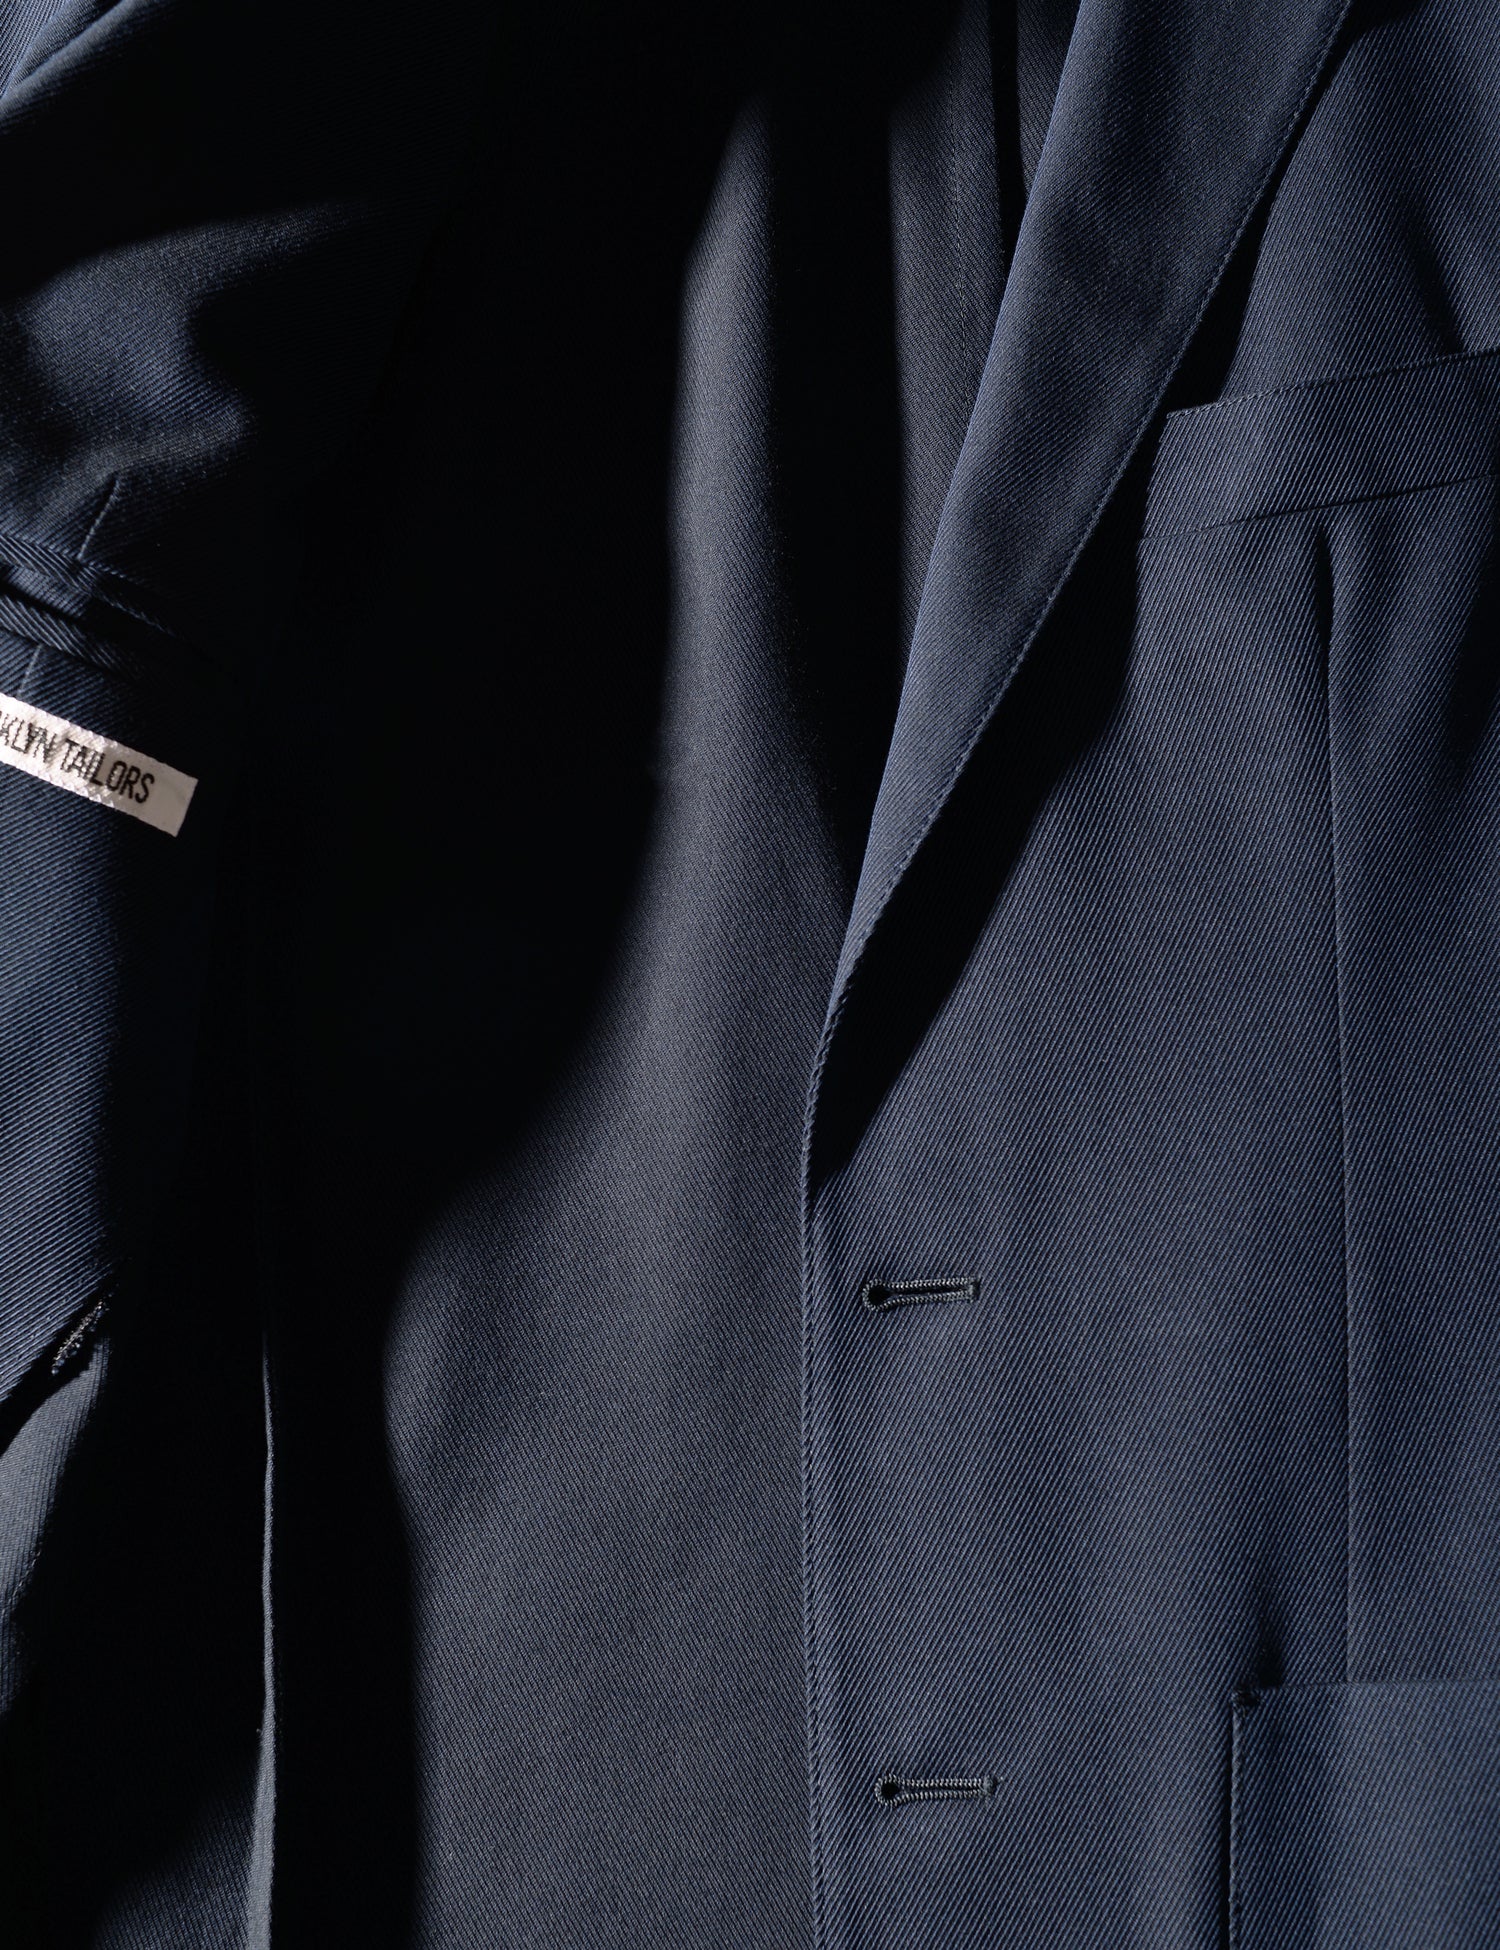 Detail shot of jacket opened showing interior labeling on Brooklyn Tailors BKT35 Unstructured Jacket in Cavalry Twill - Navy